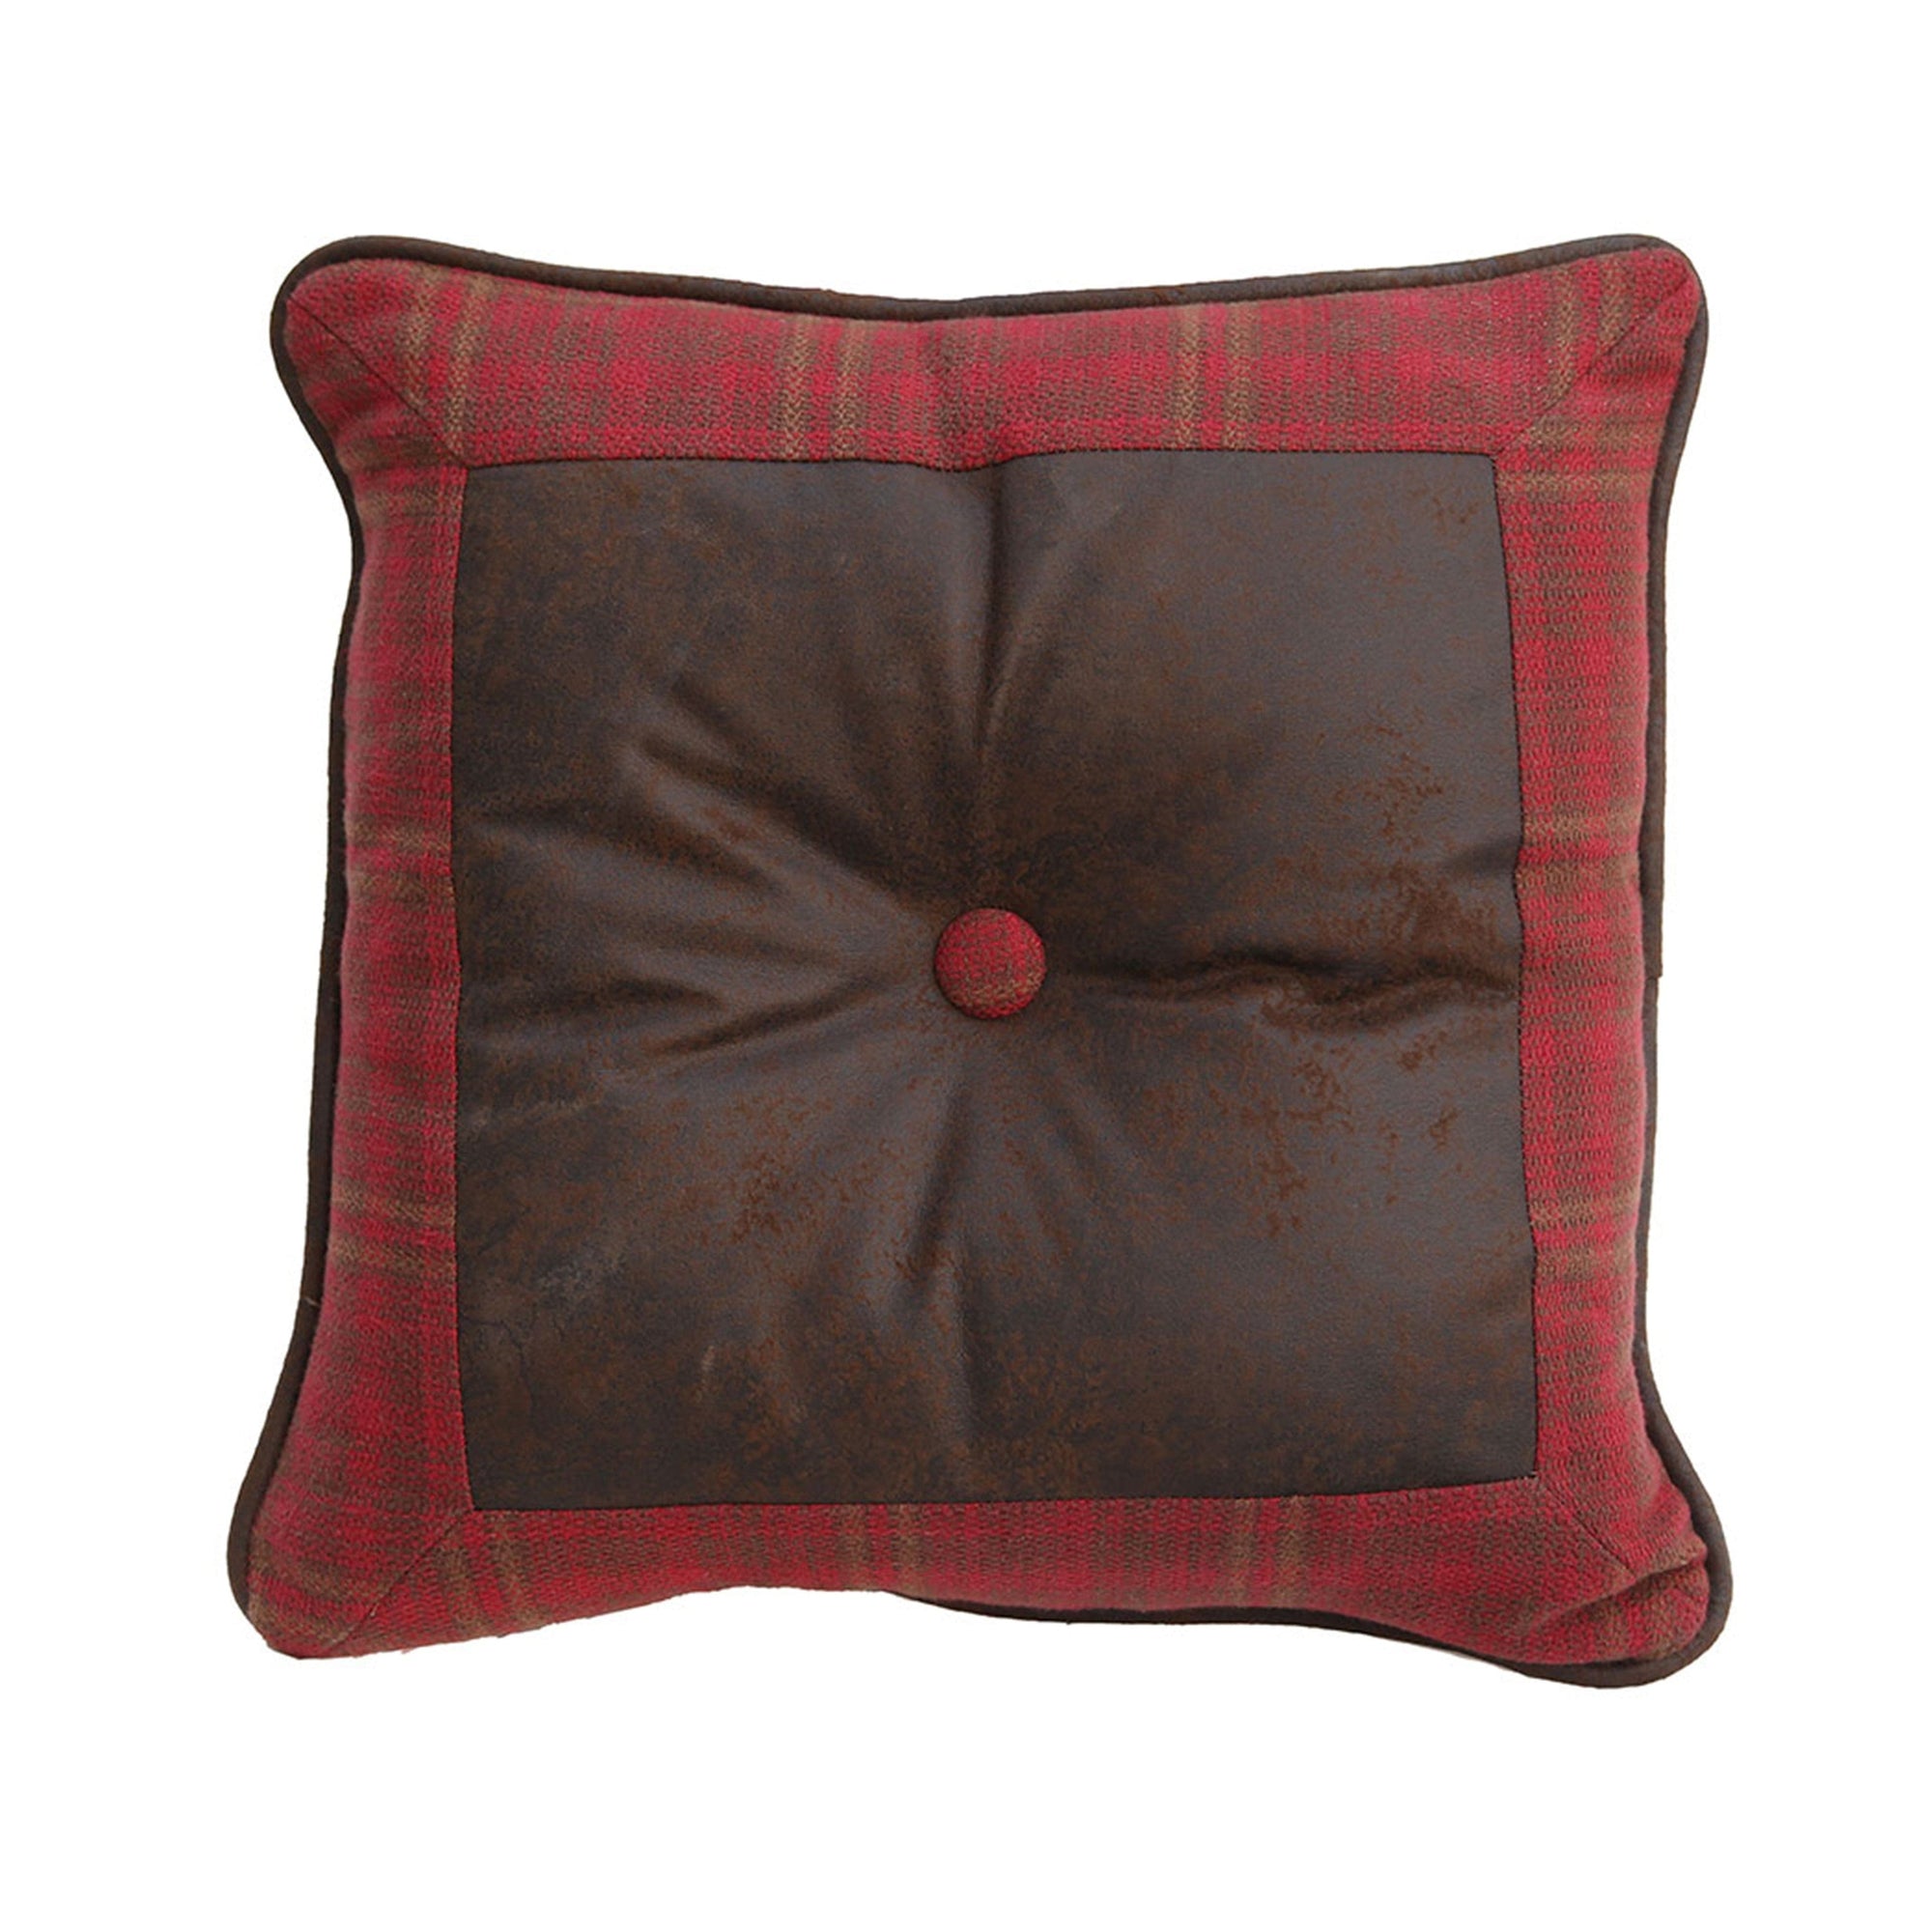 Cascade Lodge Red Plaid Throw Pillow w/ Faux Leather, 18x18 Pillow